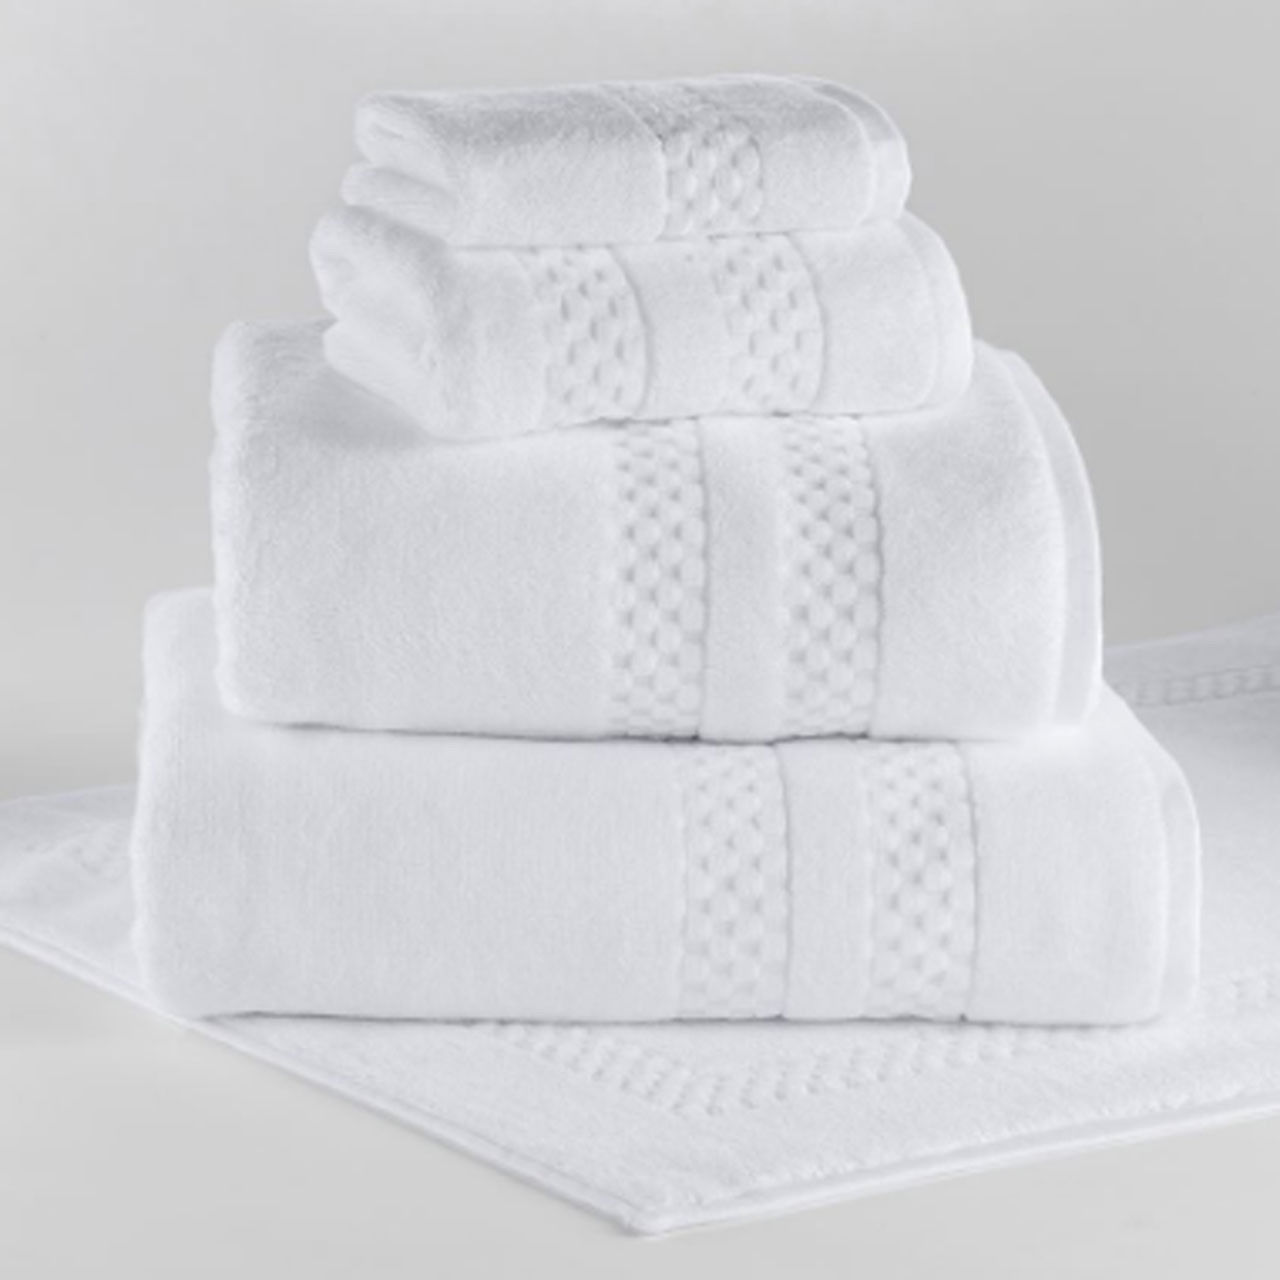 How is the cotton in these towels processed?